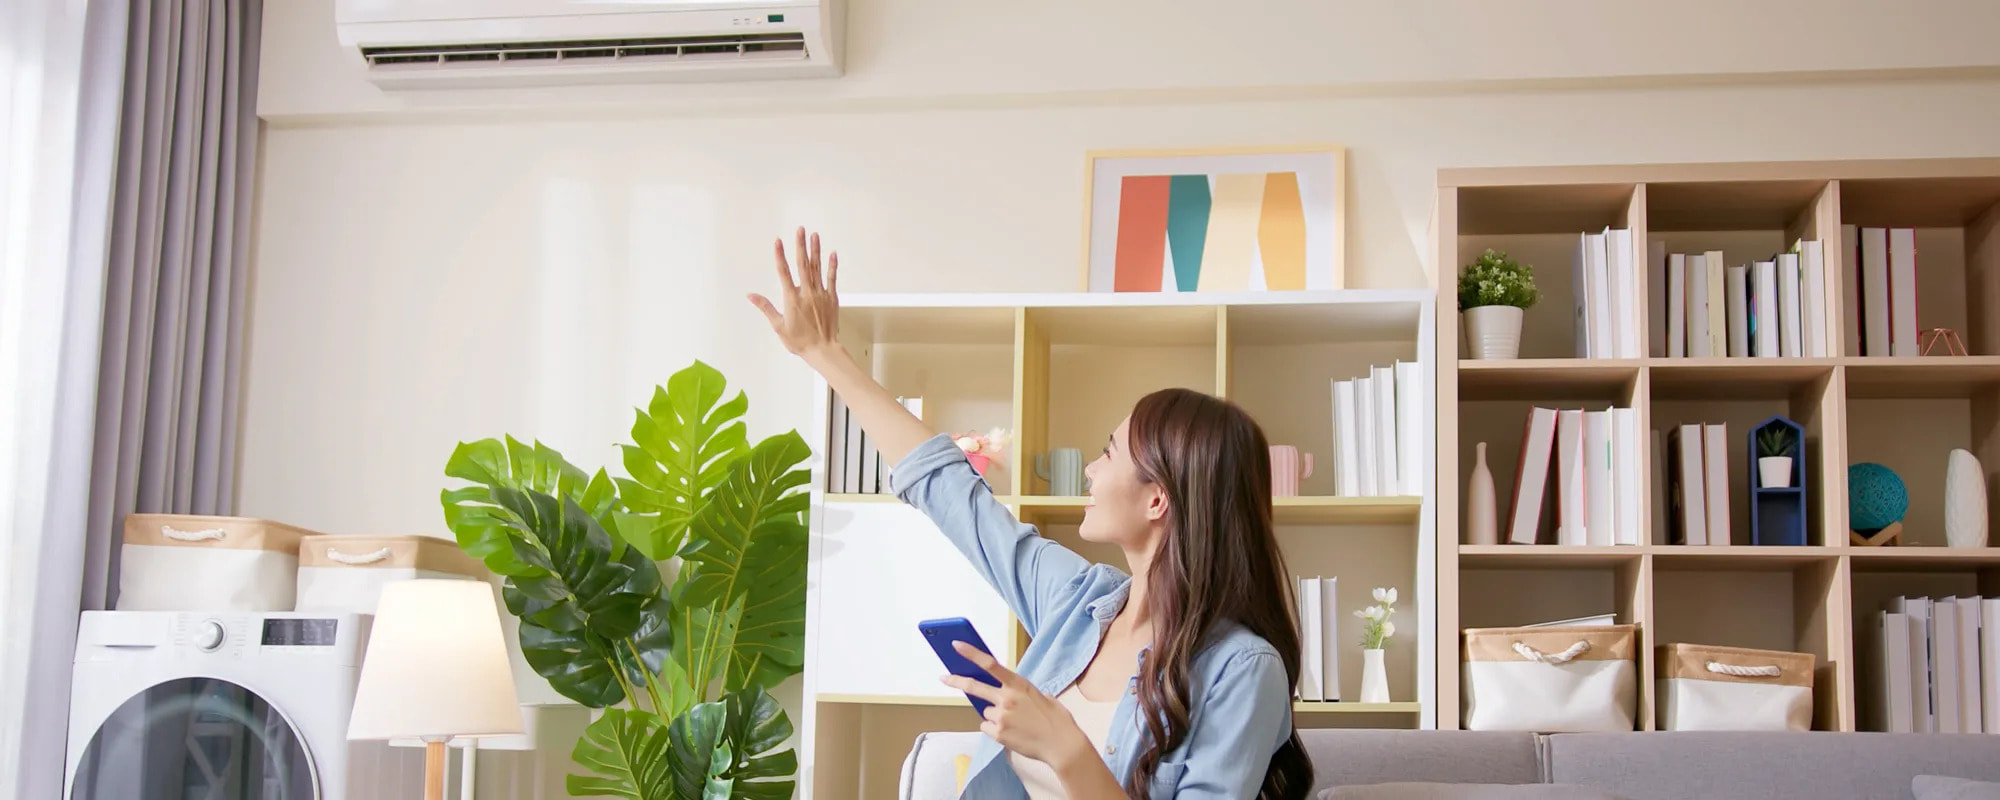 Identifying Different Air Conditioning Features Beyond One Size Fits All Cooling